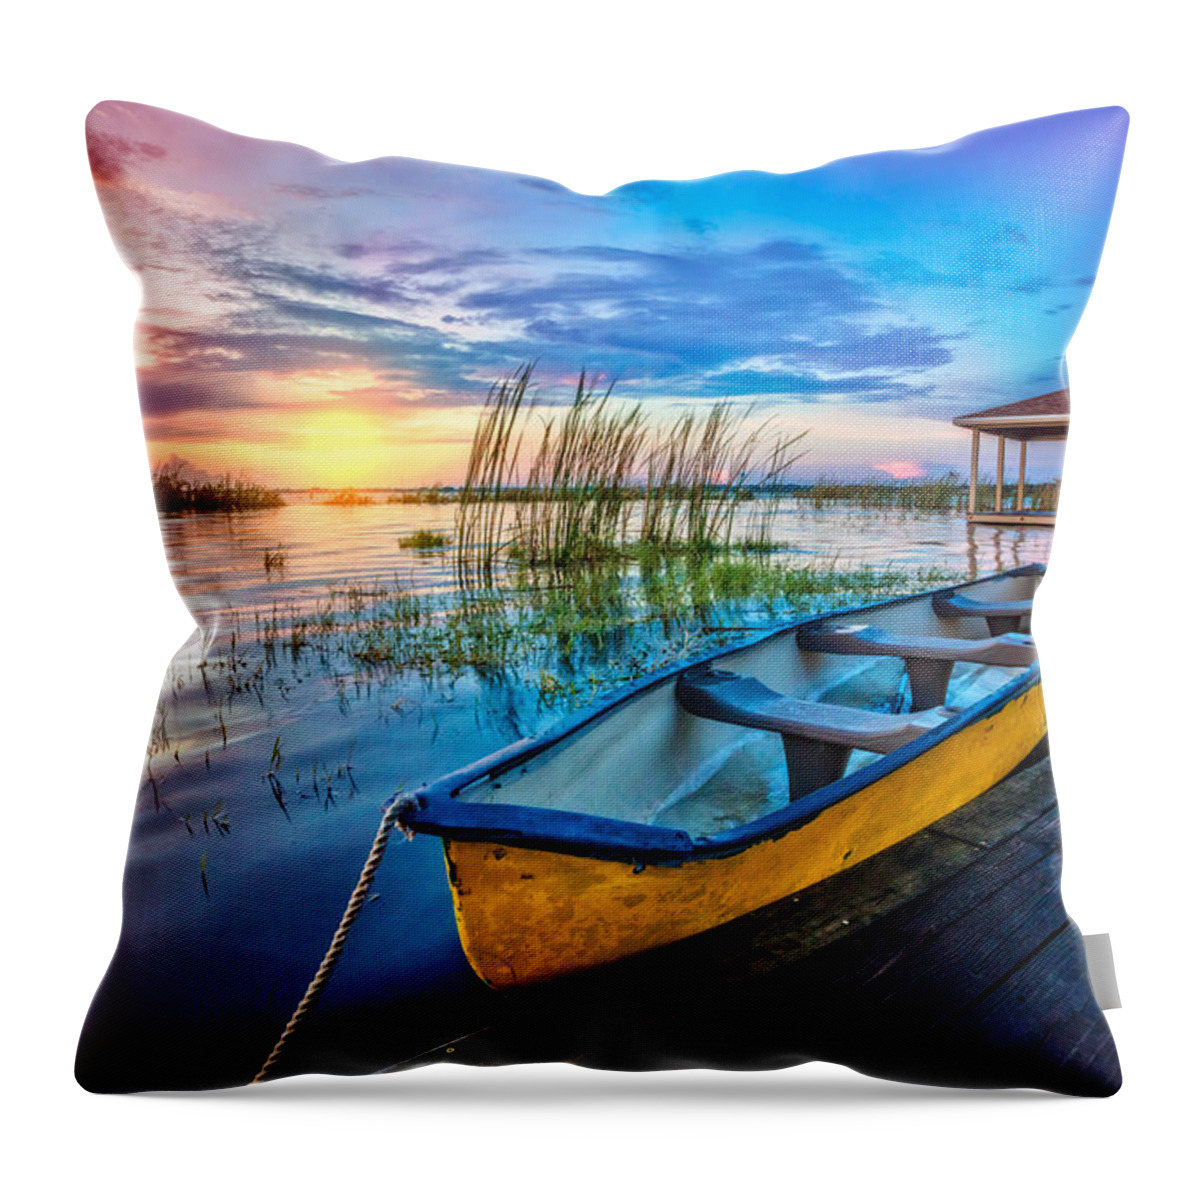 Boats Throw Pillow featuring the photograph Yellow Canoe by Debra and Dave Vanderlaan